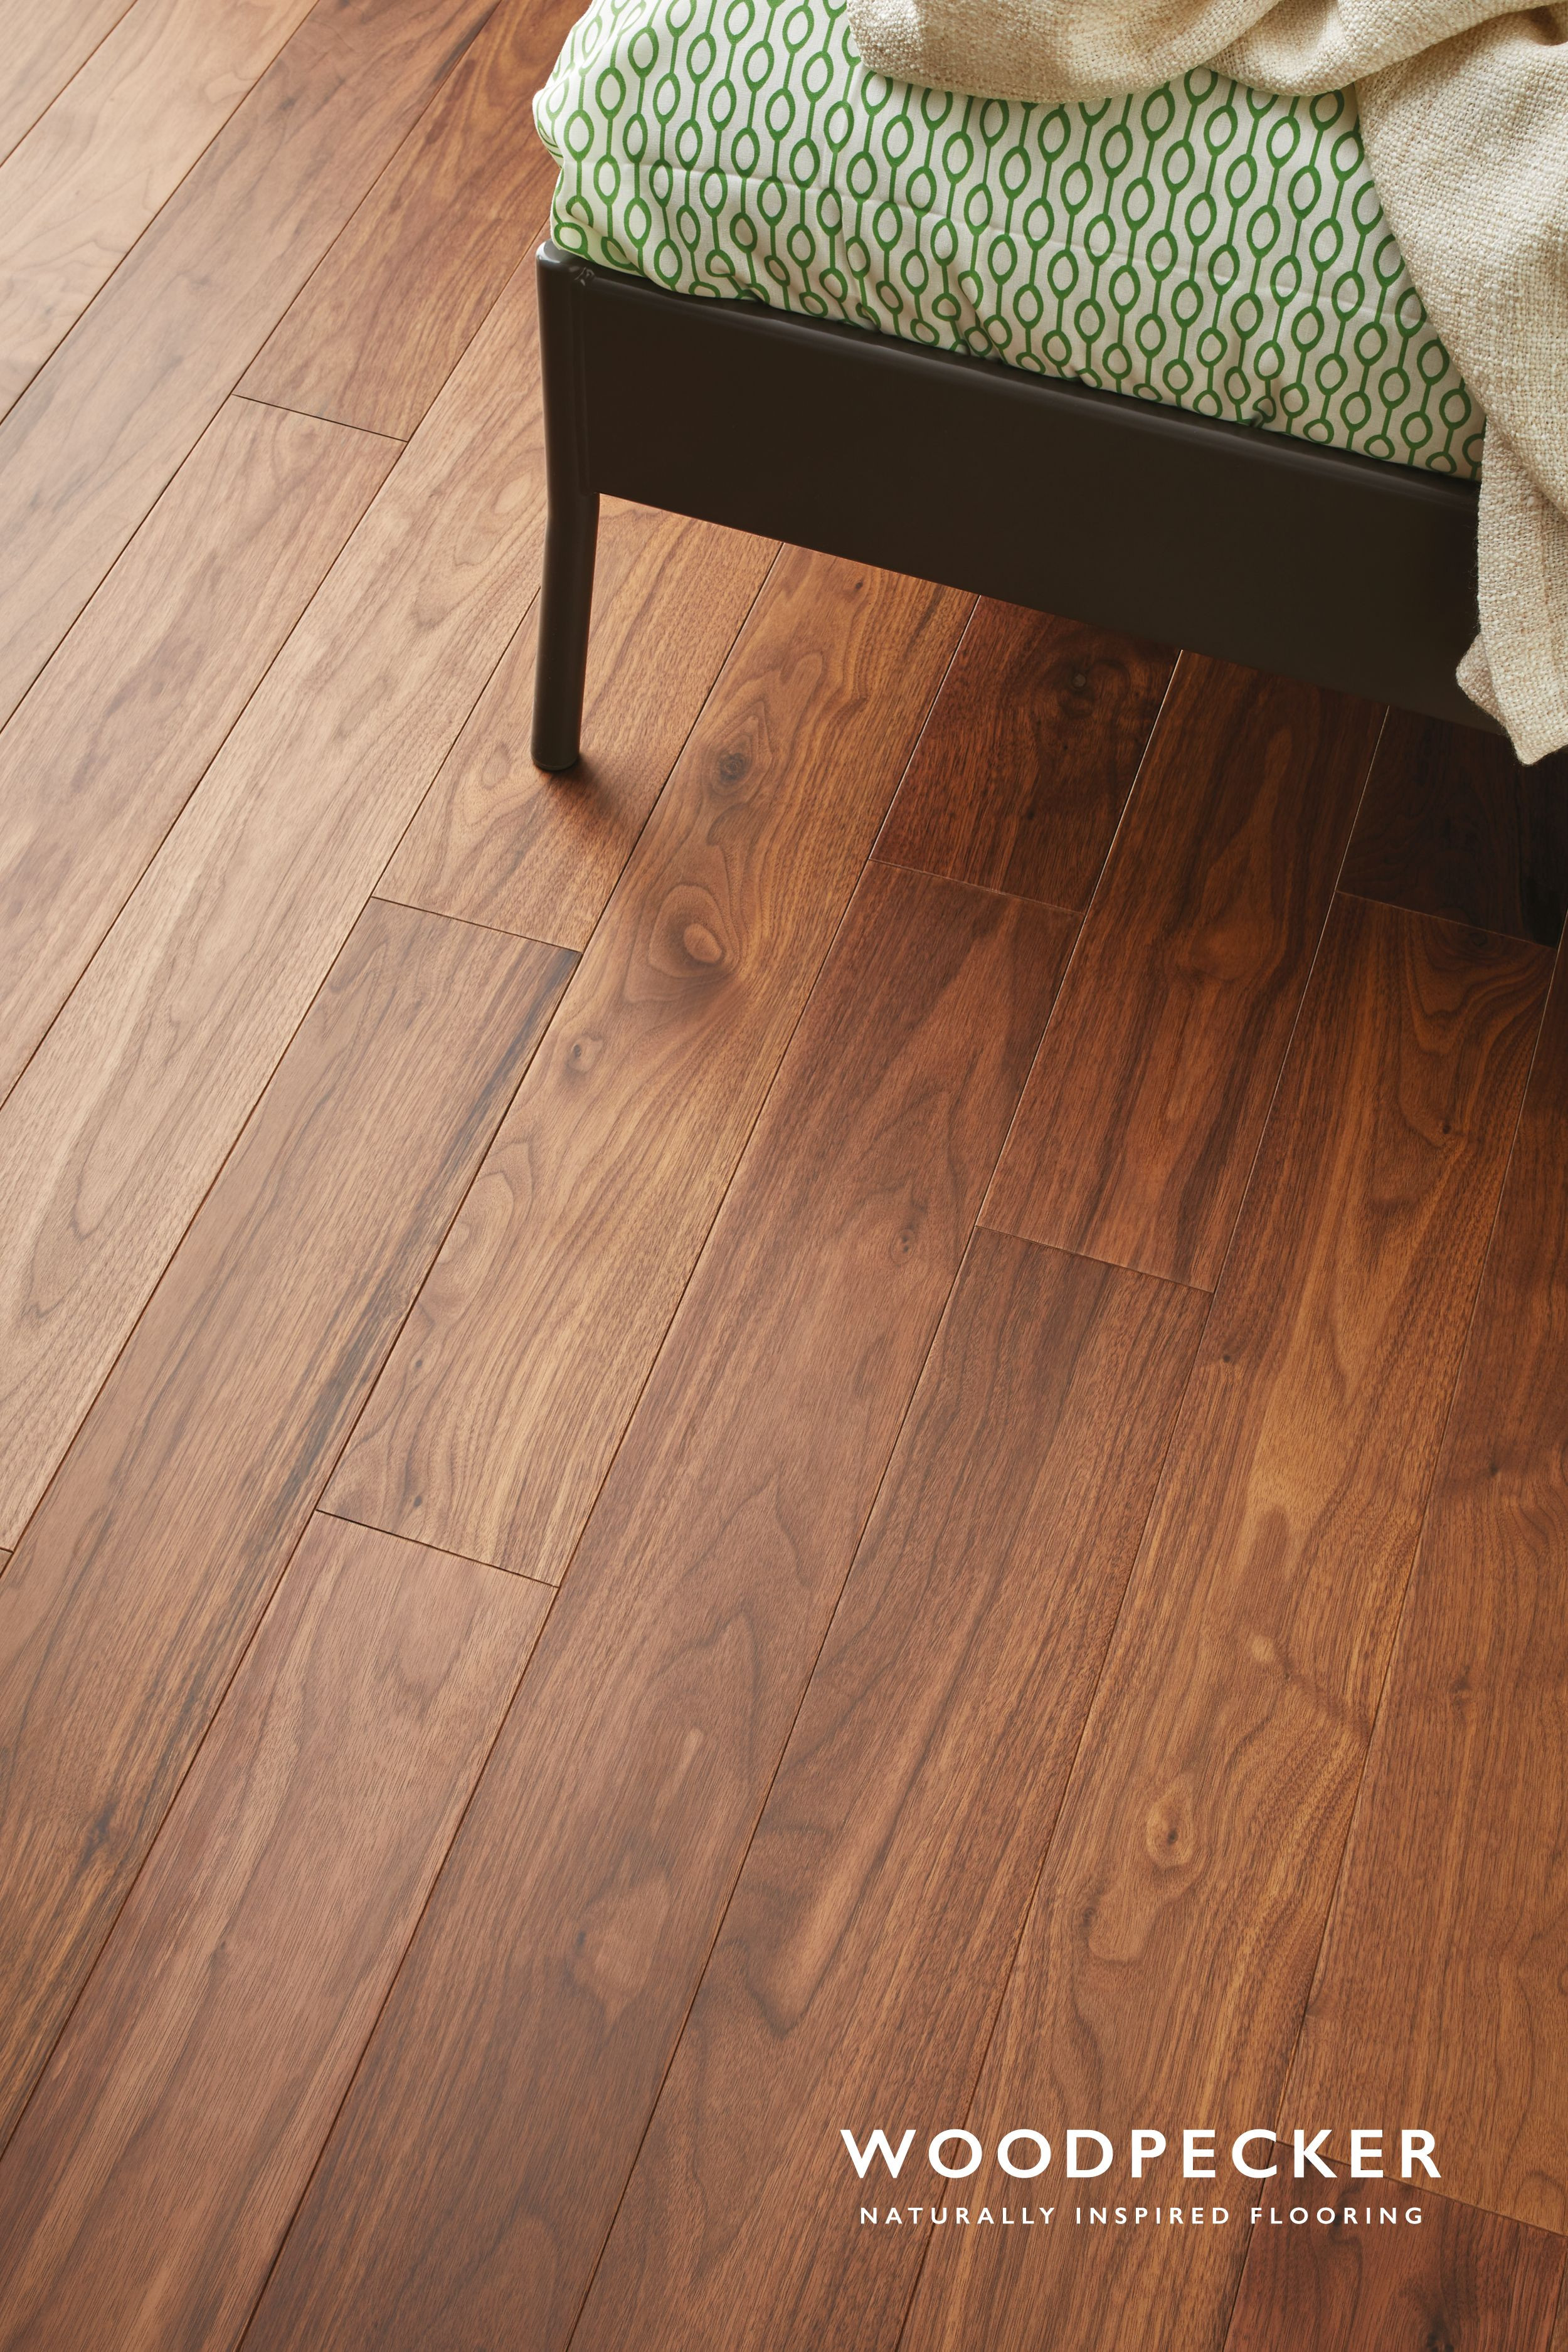 walnut hardwood flooring prices of raglan walnut in 2018 home decor pinterest wood flooring with walnut flooring is exotic and exciting with wide flowing grain patterns and a medley chocolate shades get a free sample of raglan walnut